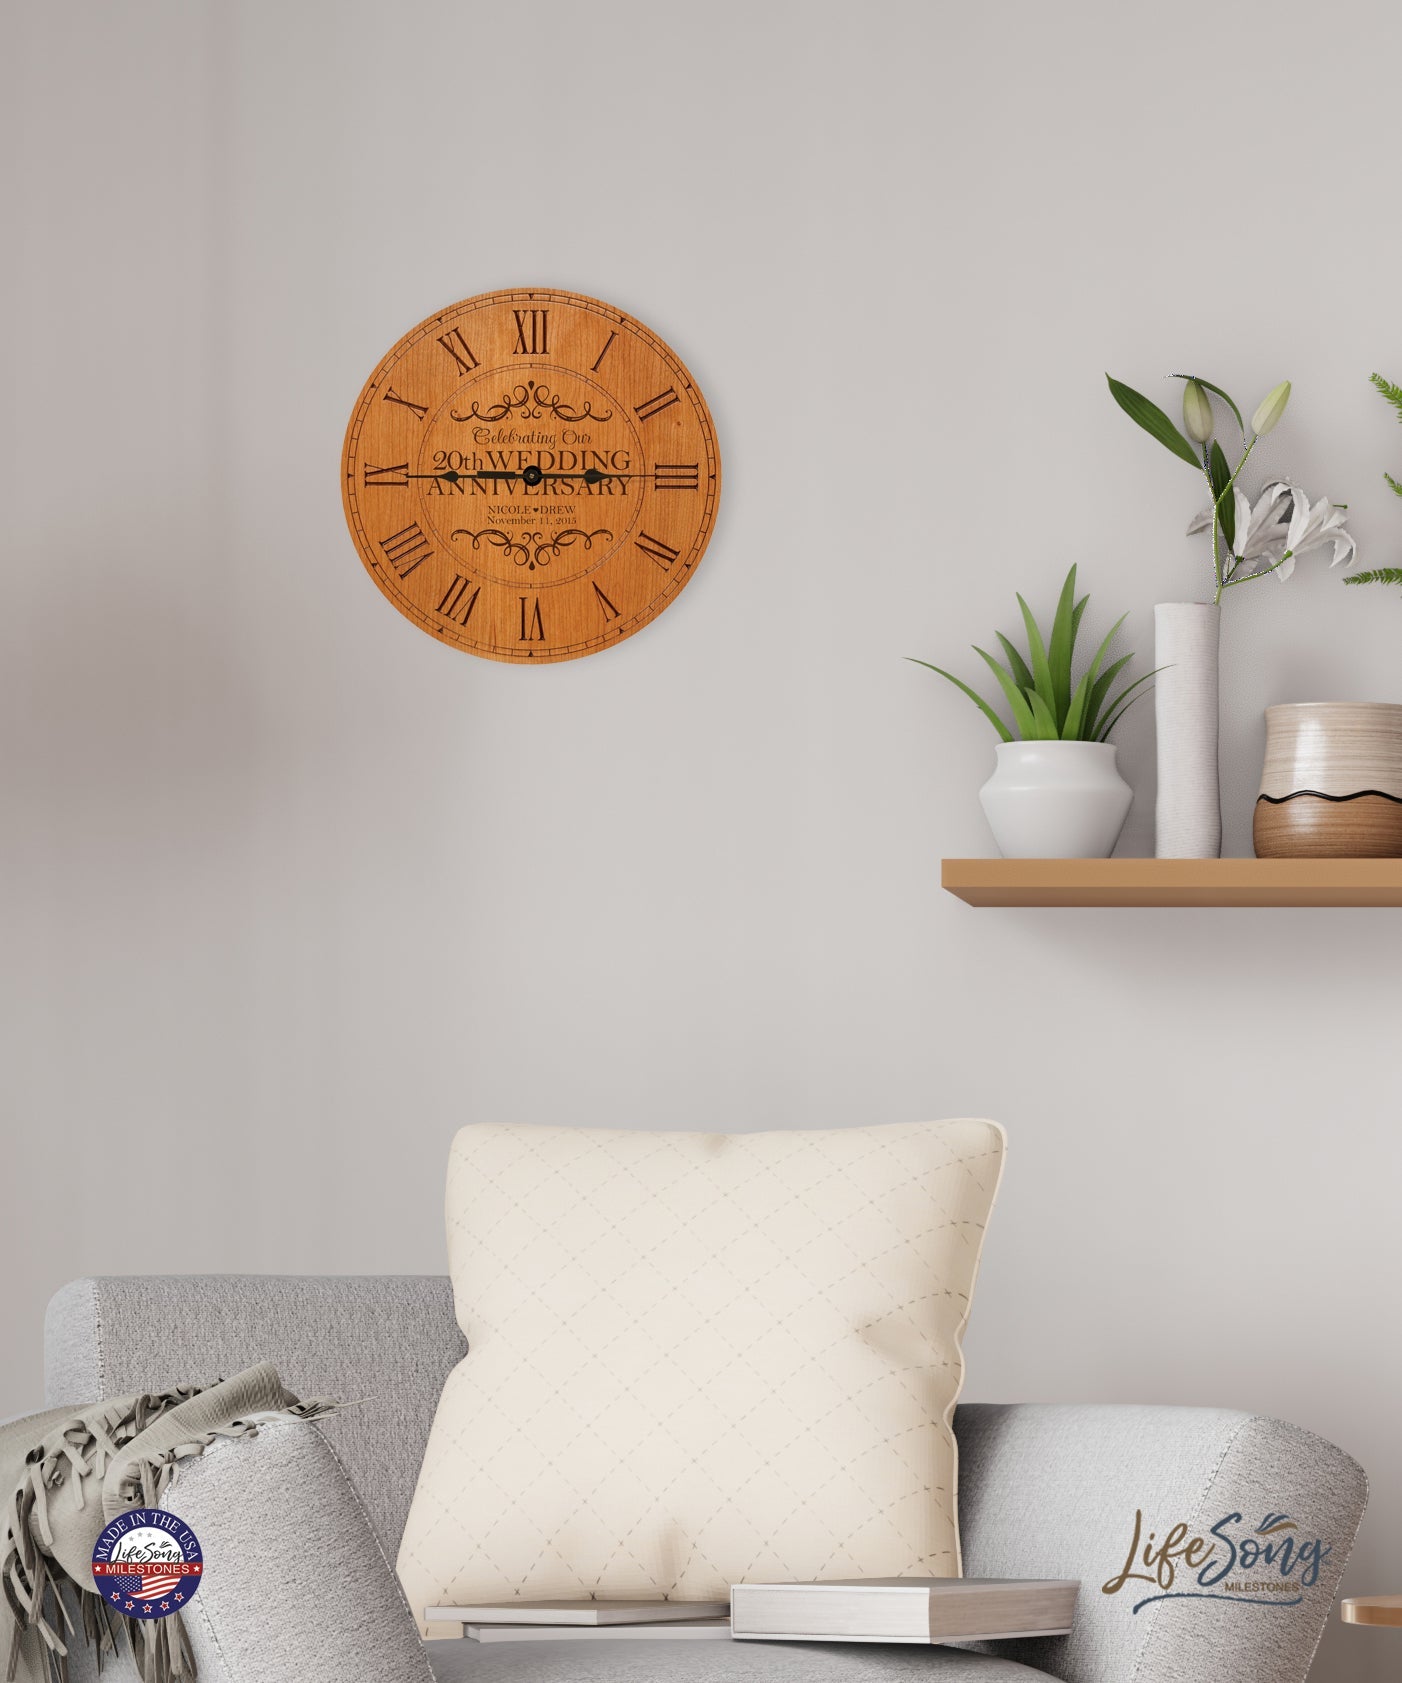 Personalized Engraved Wooden Wall Clock for 20th Wedding Anniversary Gift Ideas - LifeSong Milestones